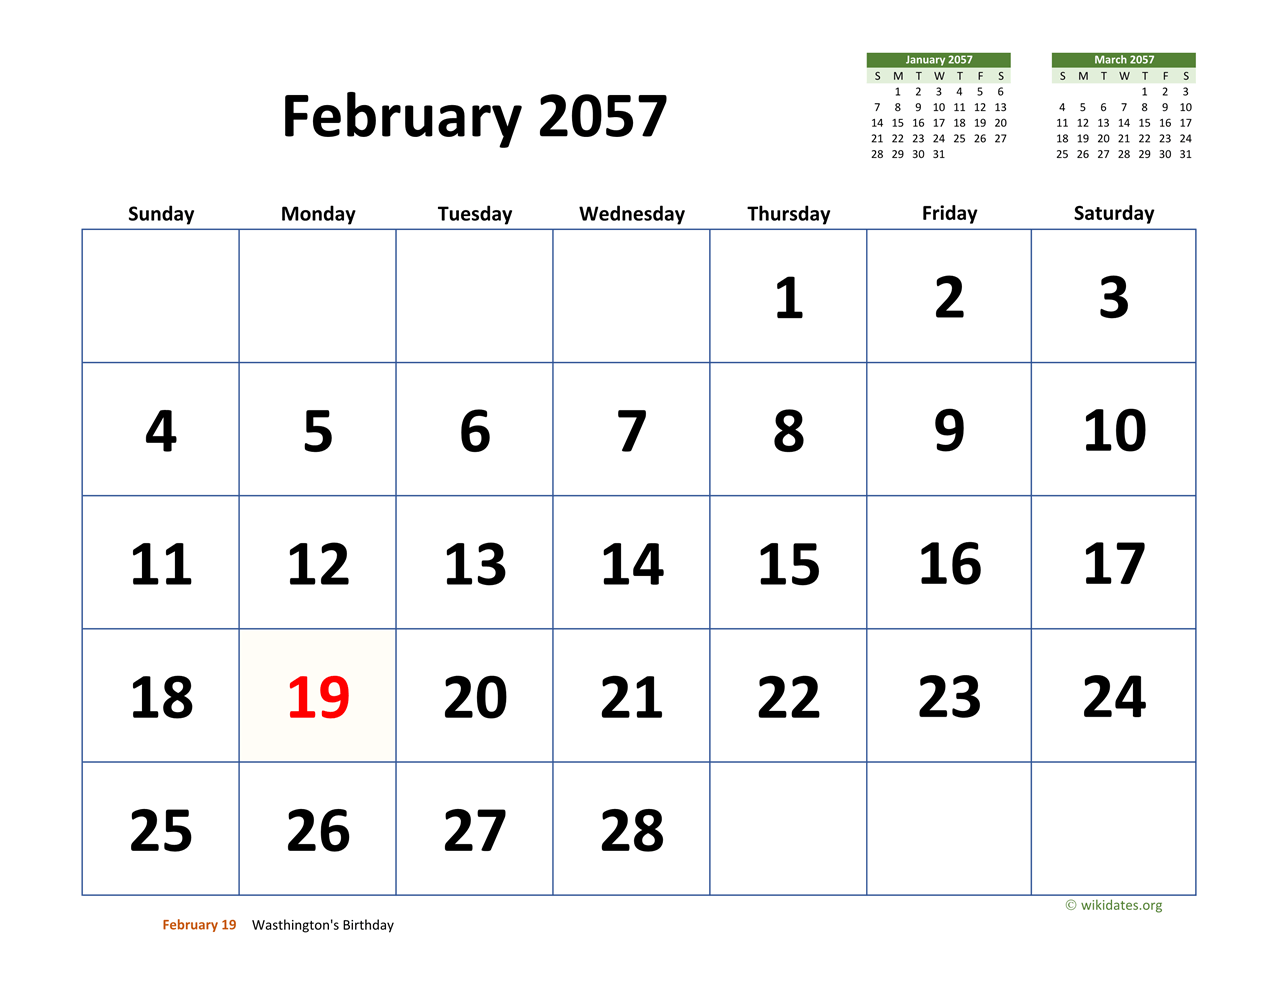 February 2057 Calendar with Extralarge Dates